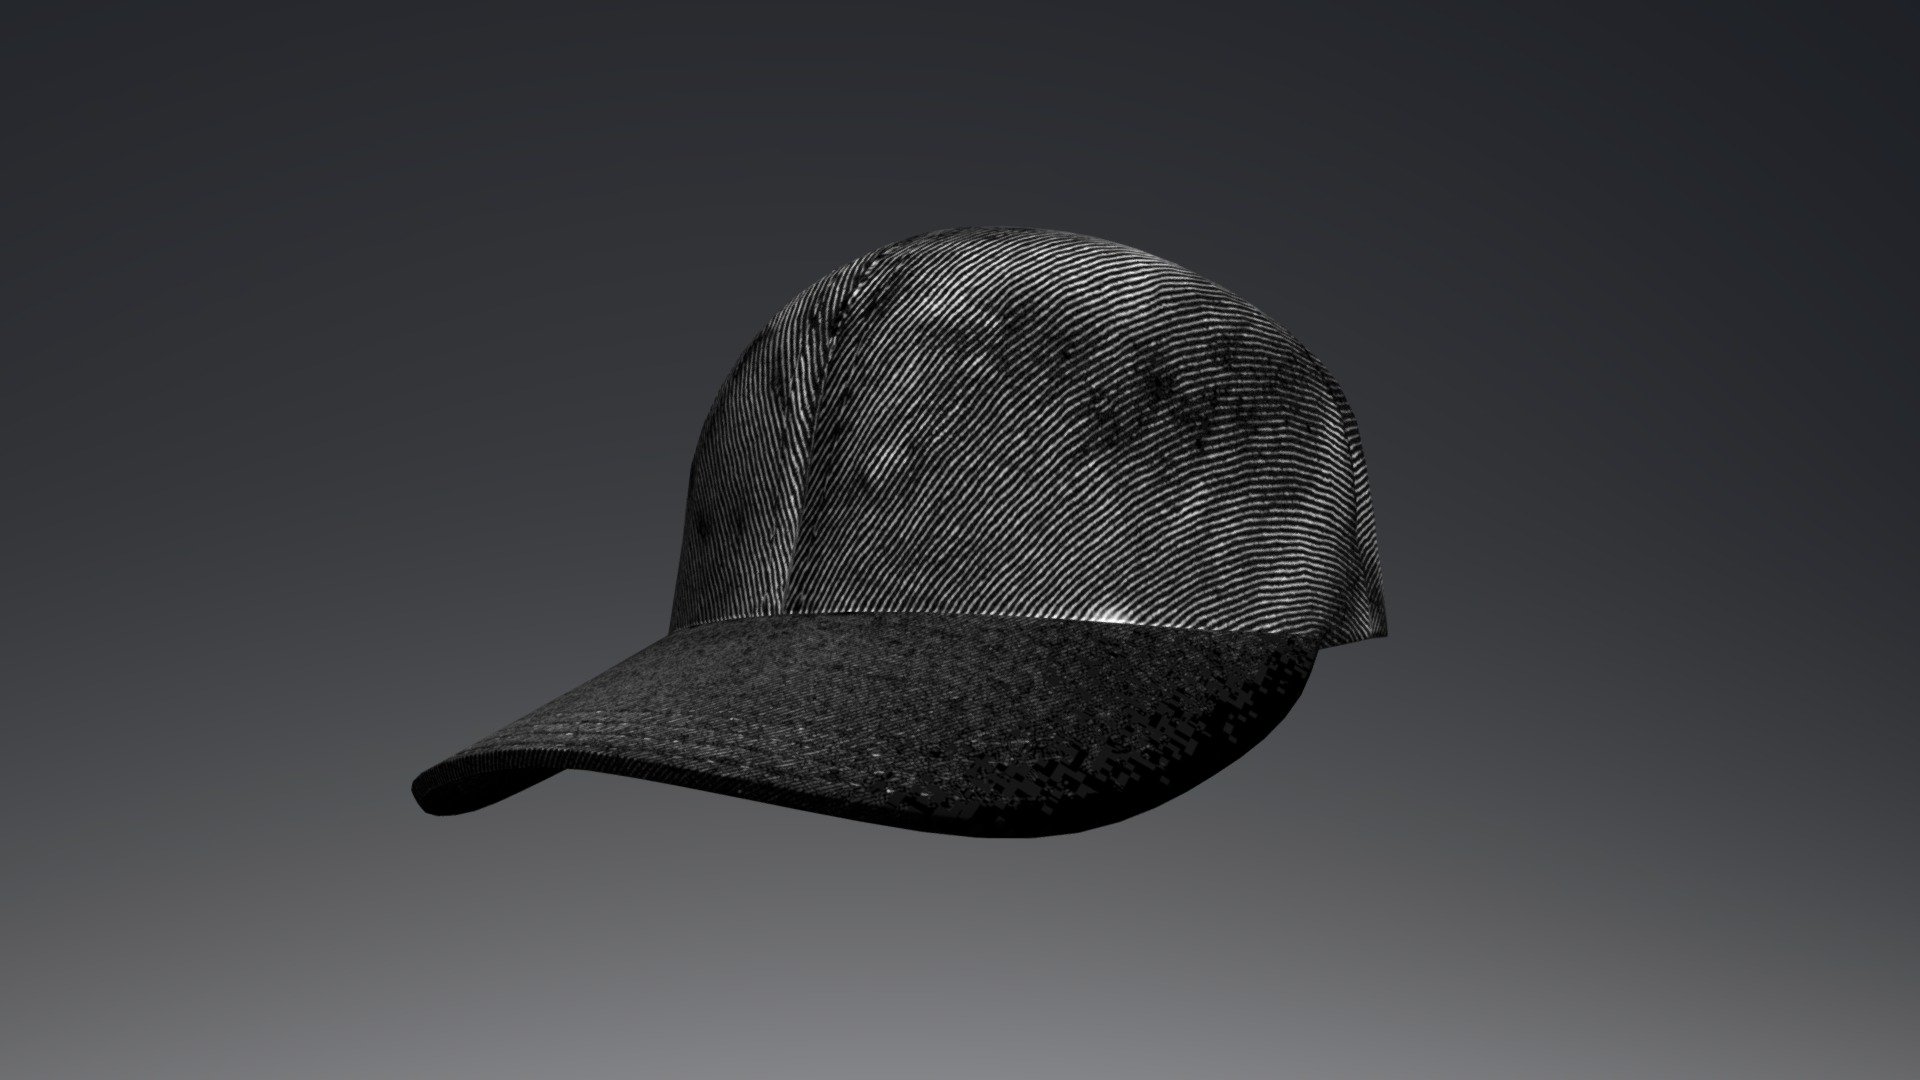 A baseball cap is a type of soft cap with a rounded crown and a stiff bill projecting in front. The front of the cap typically displays a design or a logo (historically, usually only a sports team, namely a baseball team, or names of relevant companies, when used as a commercial marketing technique). The cap may be &ldquo;fitted